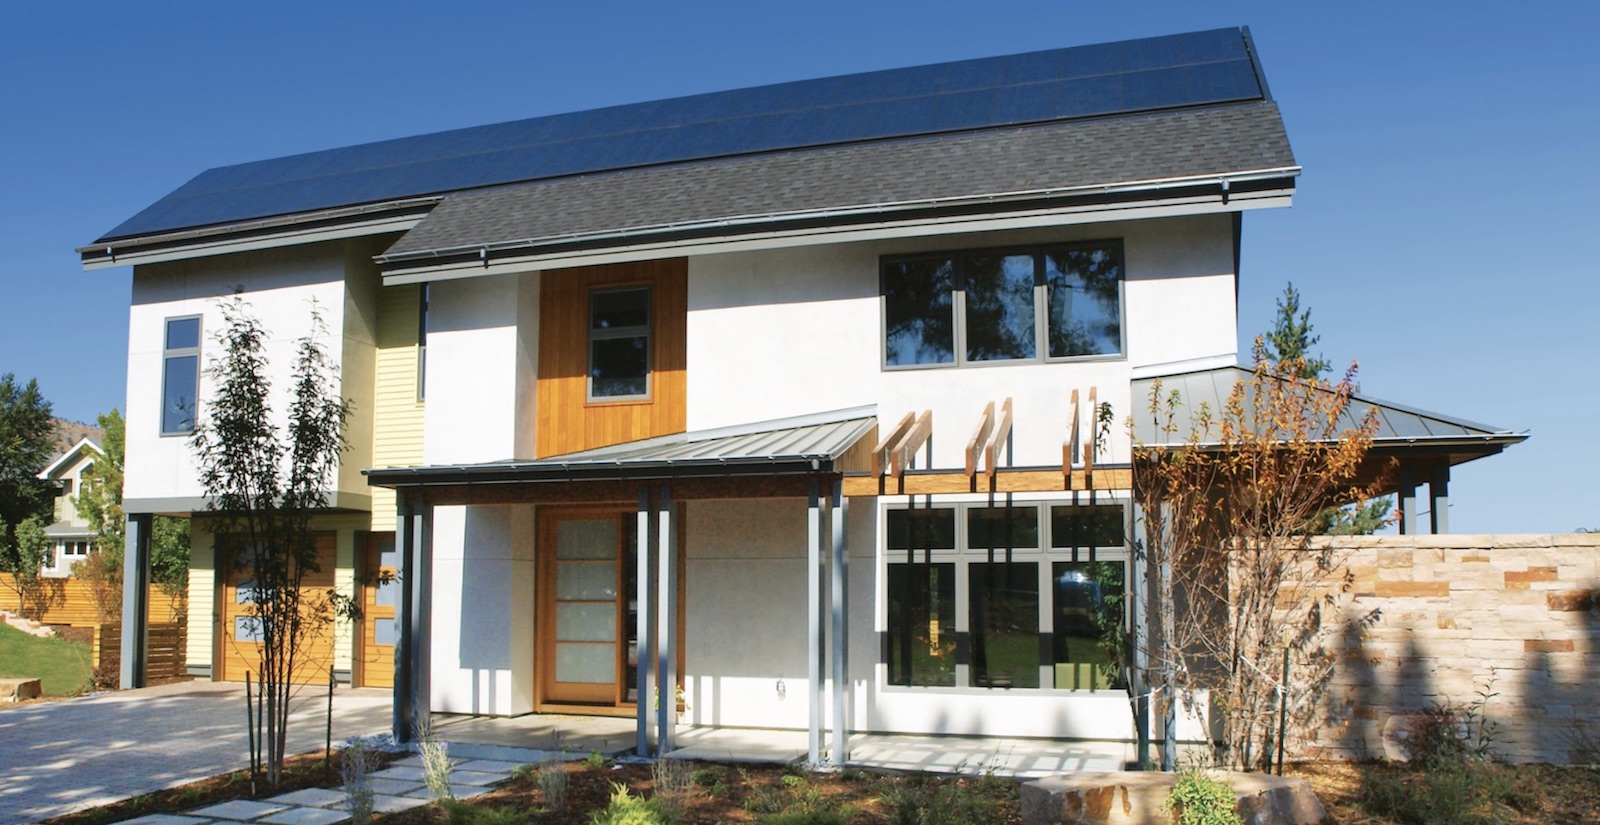 LEED Platinum home with high-performance features in Boulder, Colorado 